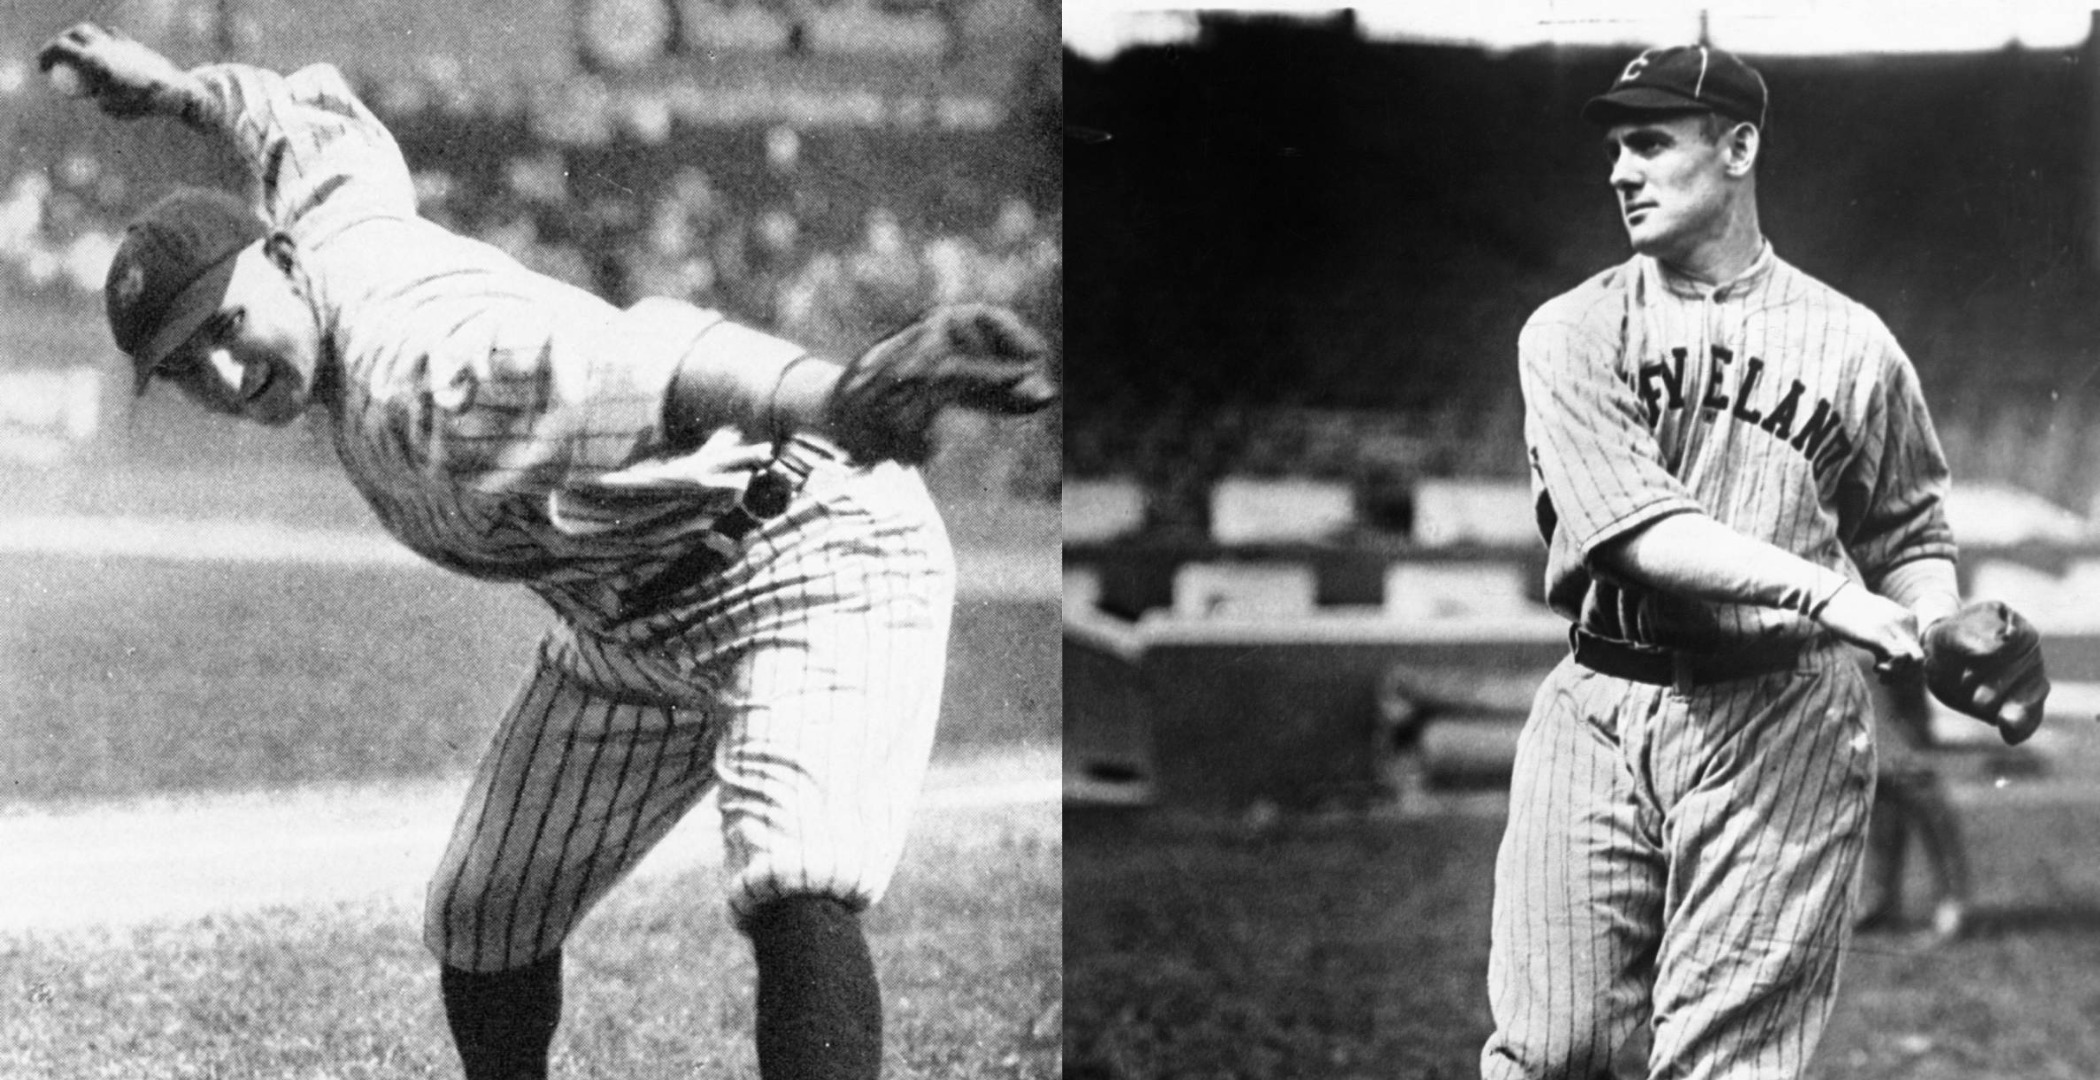 New York Yankees pitcher Carl Mays (L) said he didn't feel guilty for accidently killing Cleveland infielder Ray Chapman.